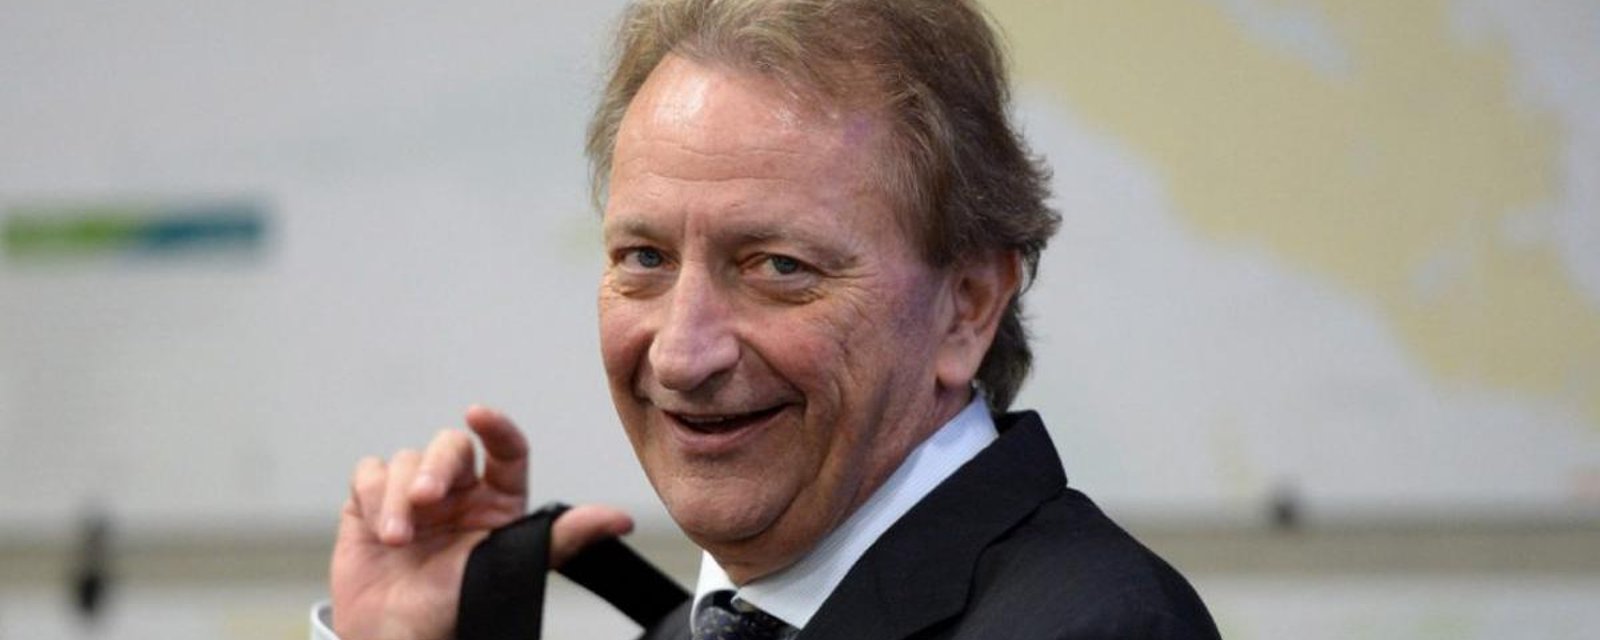 Eugene Melnyk makes surprising comments about own team! 